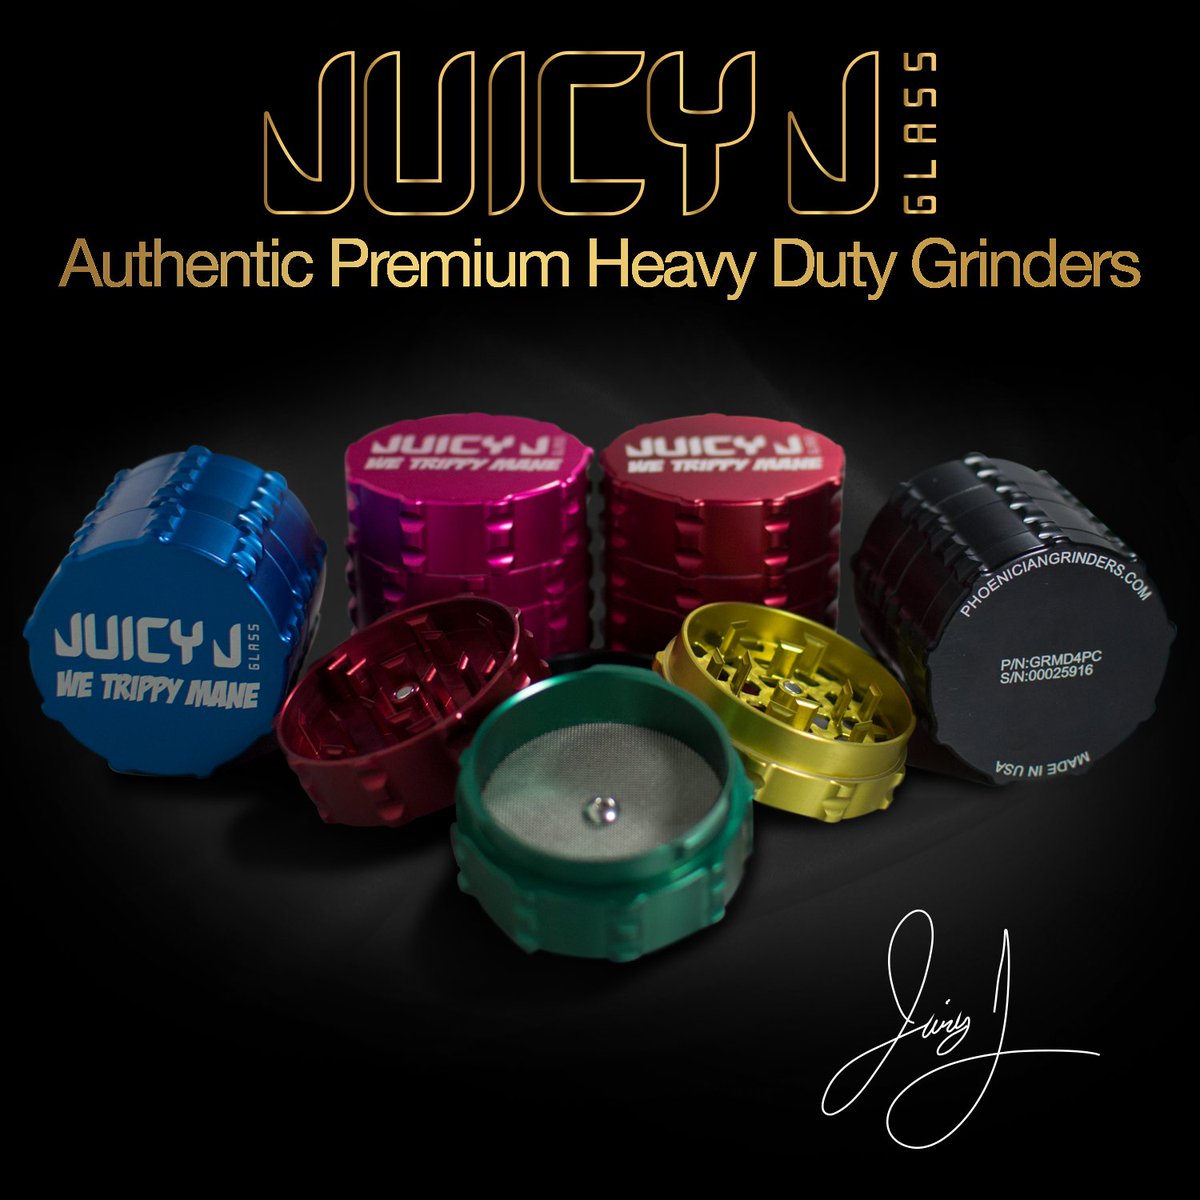 INTRODUCING - - Juicy J Grinders by @grindphoenician. That's right, We've teamed up with the best in the game to bring you medical grade grinders!! 5 colors available... pink,blue,black,red and RASTA......Go to juicyjglass.com NOW to get yours!